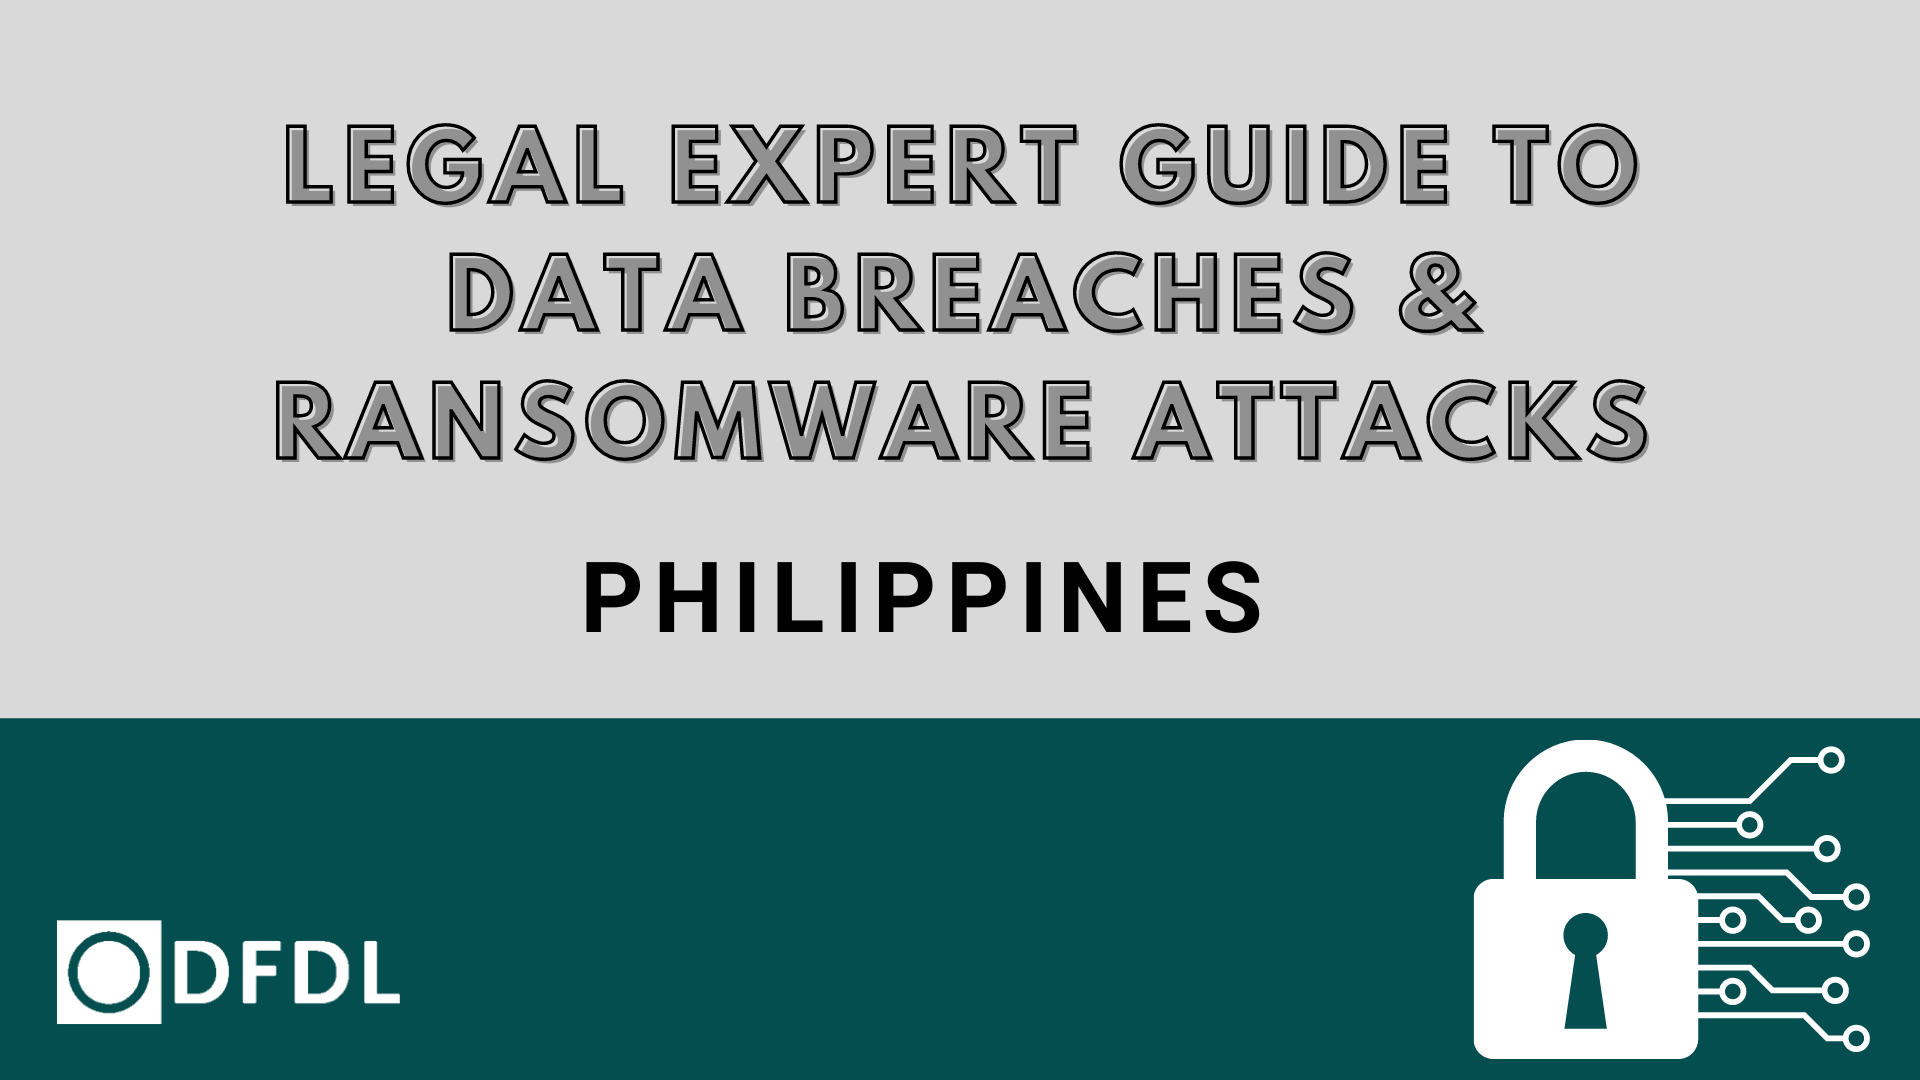 Legal Expert Guide to Data Breaches & Ransomware Attacks in the Philippines